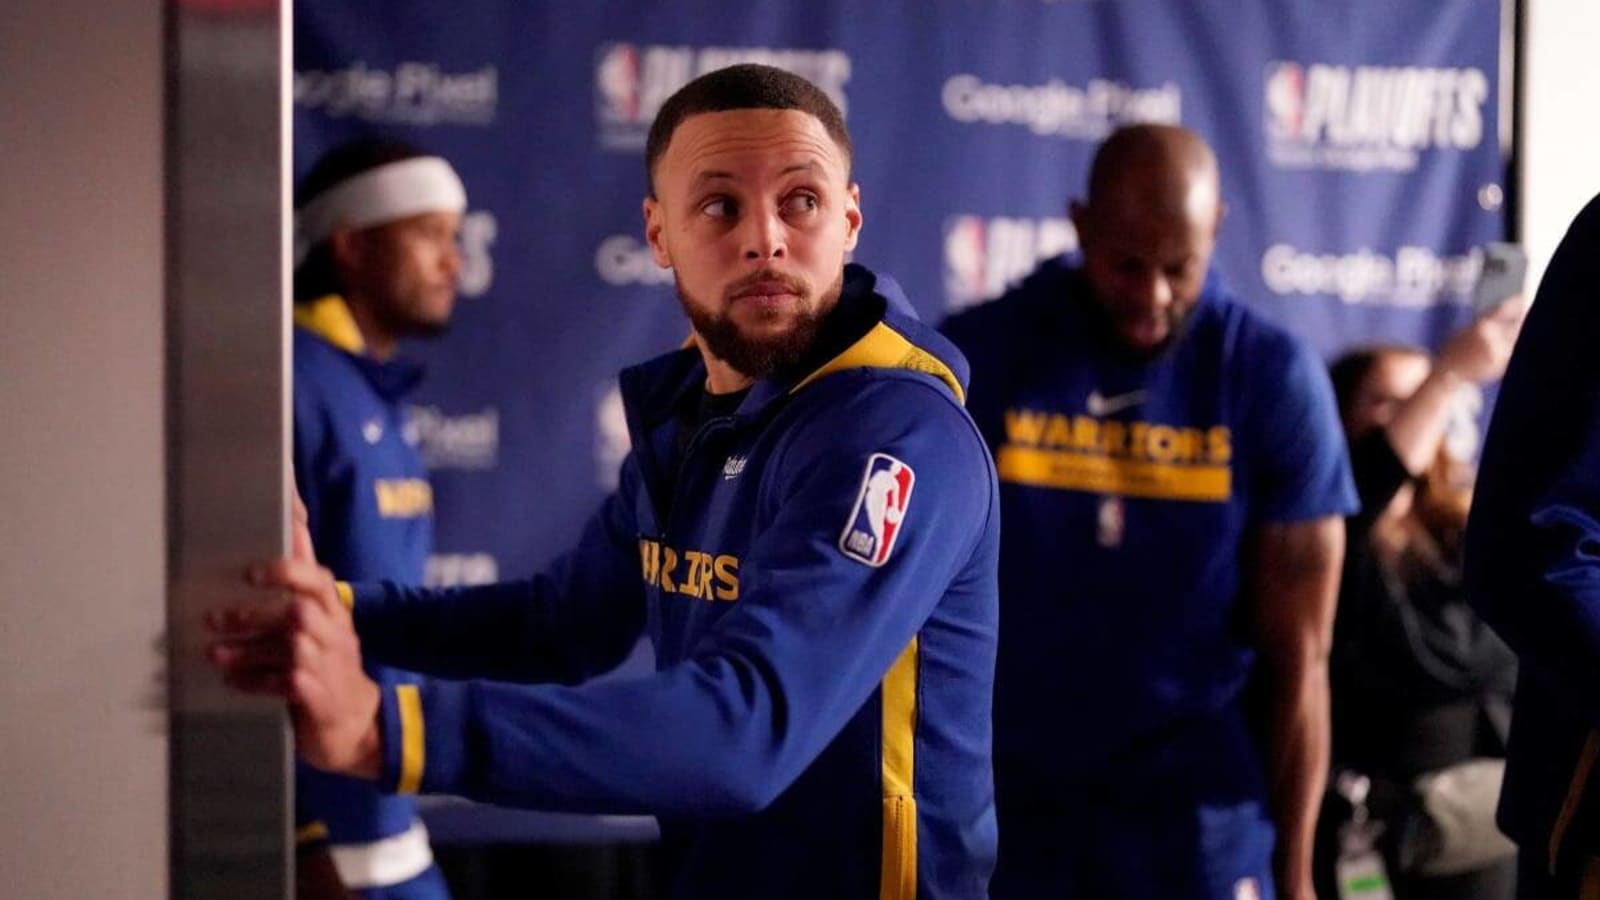 Steph Curry Gets Honest About ‘Egos’ Going Into Warriors Season